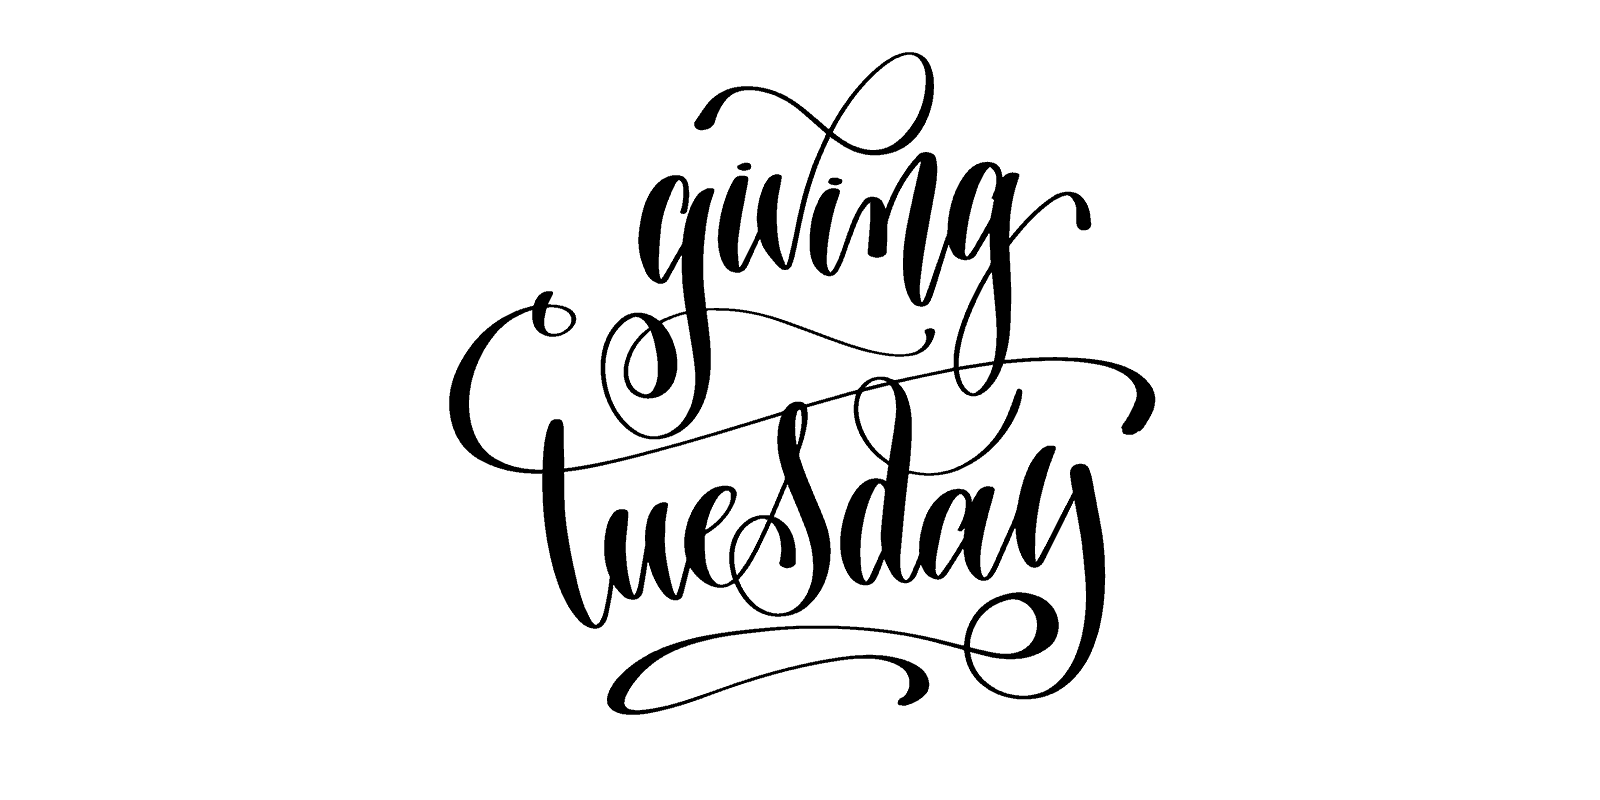 "Giving Tuesday" written in elegant, looping font